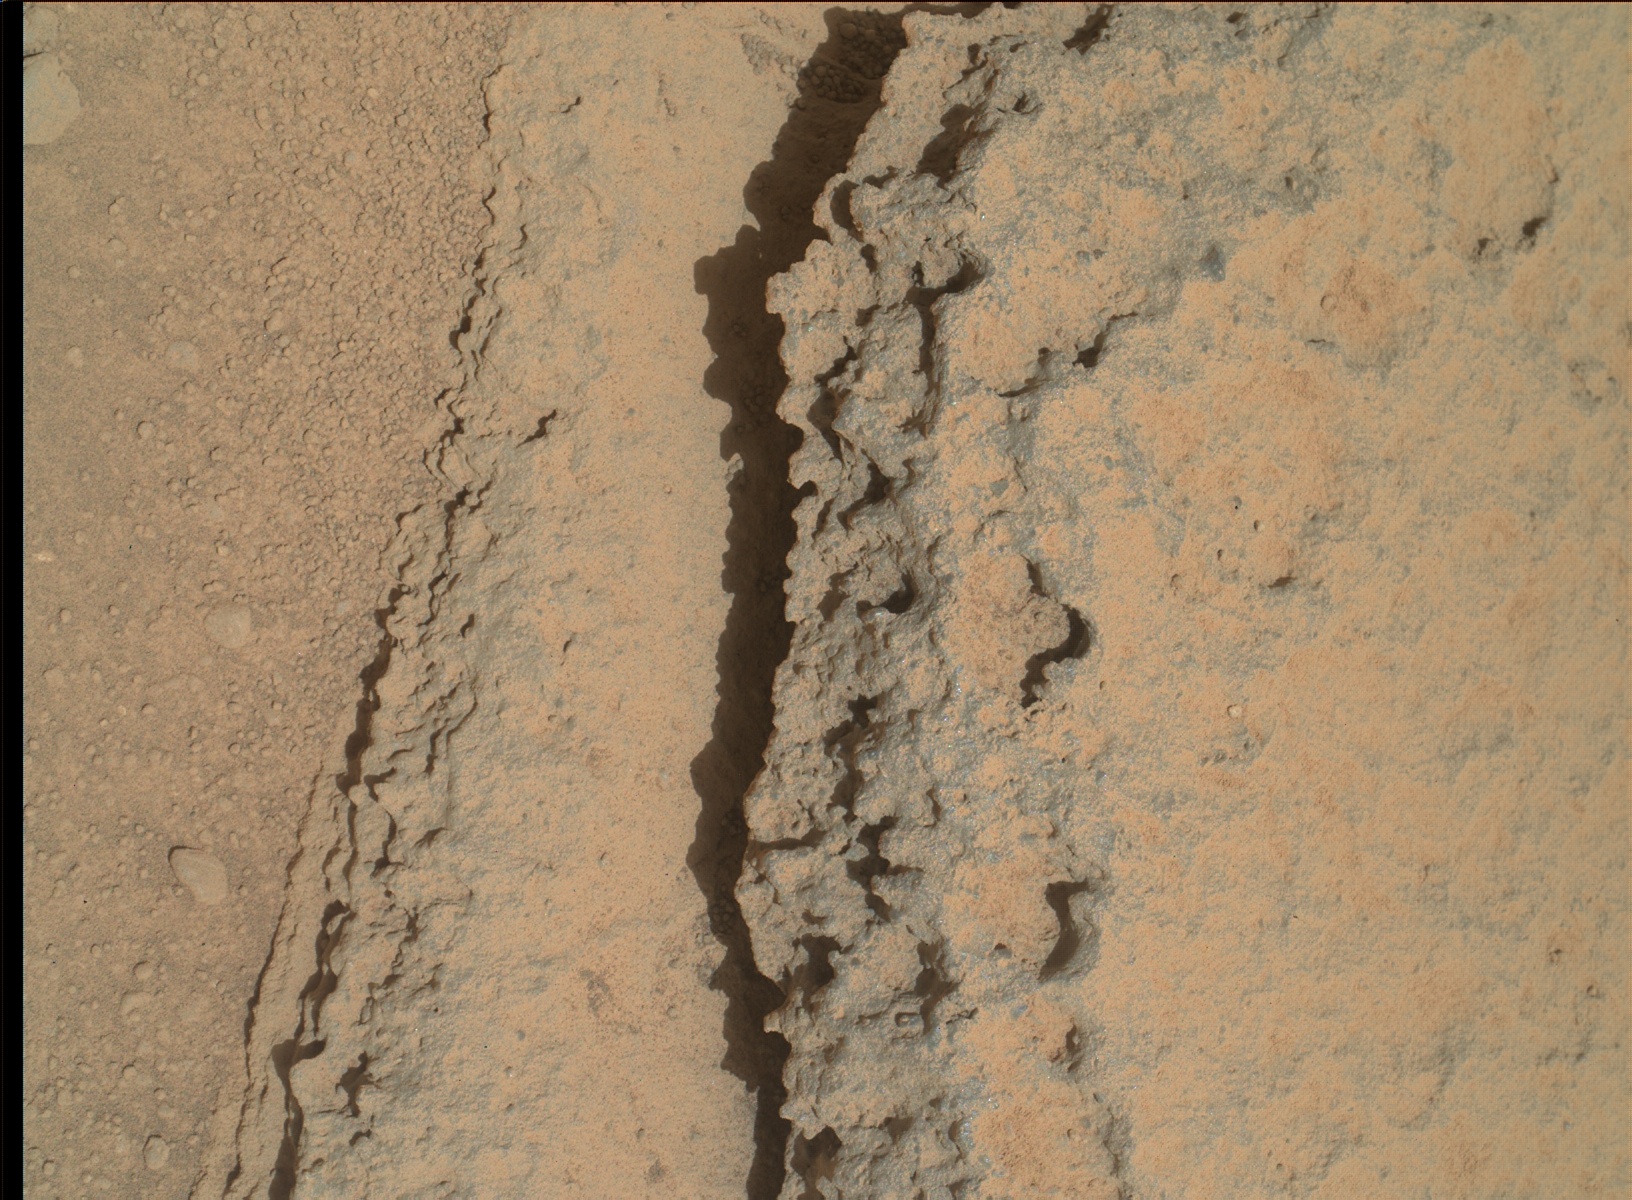 Nasa's Mars rover Curiosity acquired this image using its Mars Hand Lens Imager (MAHLI) on Sol 324